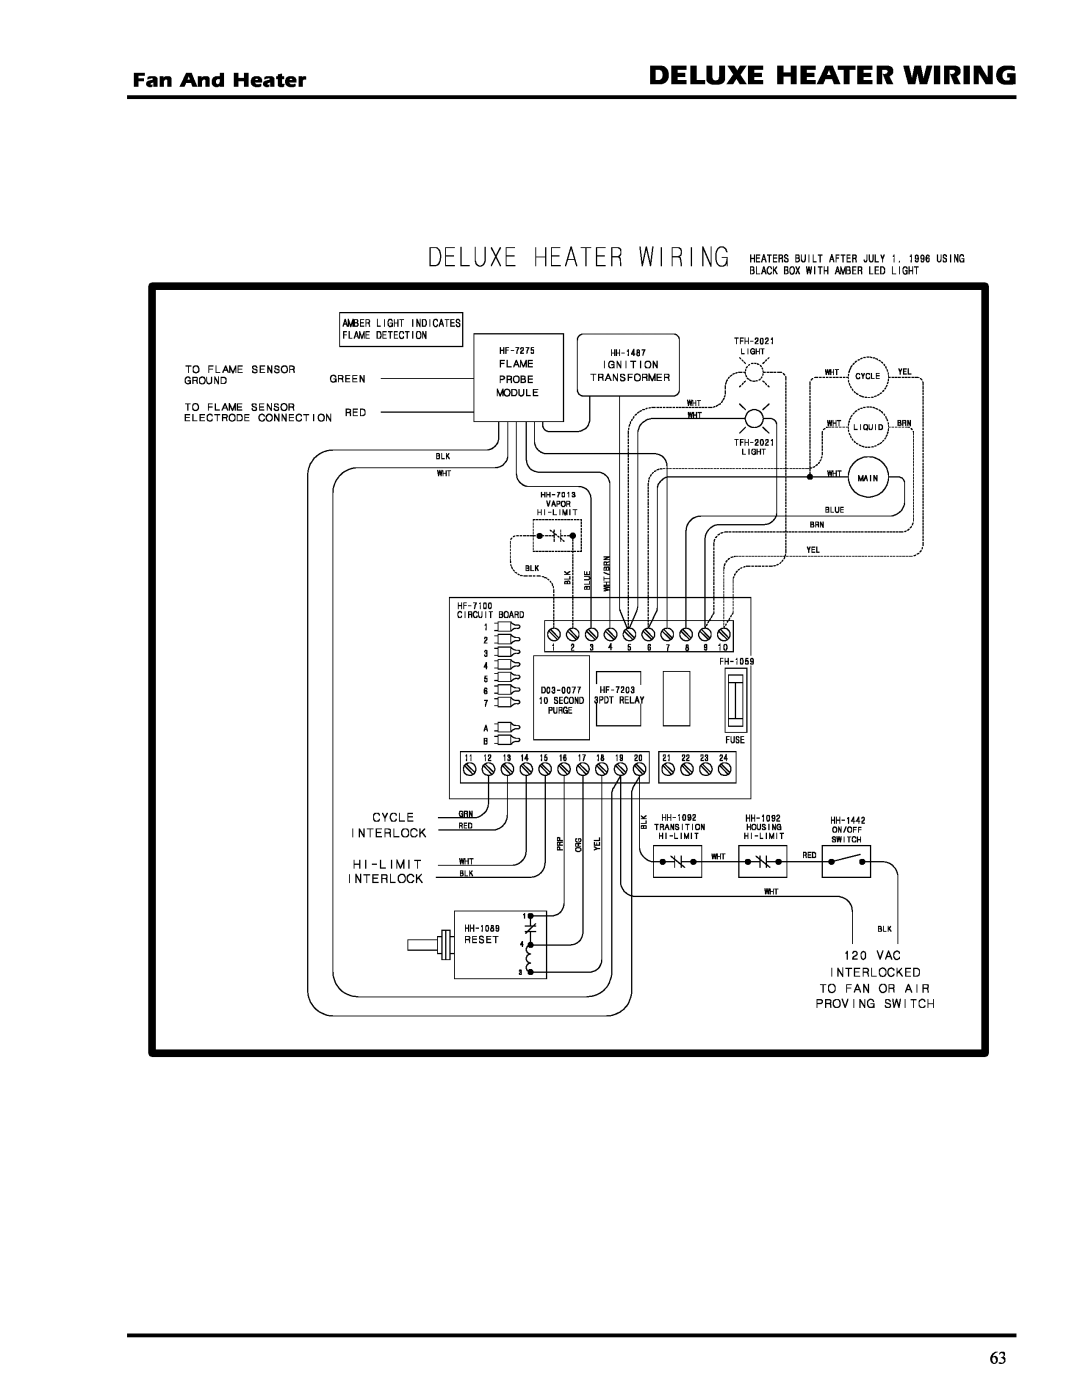 GSI Outdoors PNEG-377 service manual Deluxe Heater Wiring, Fan And Heater 